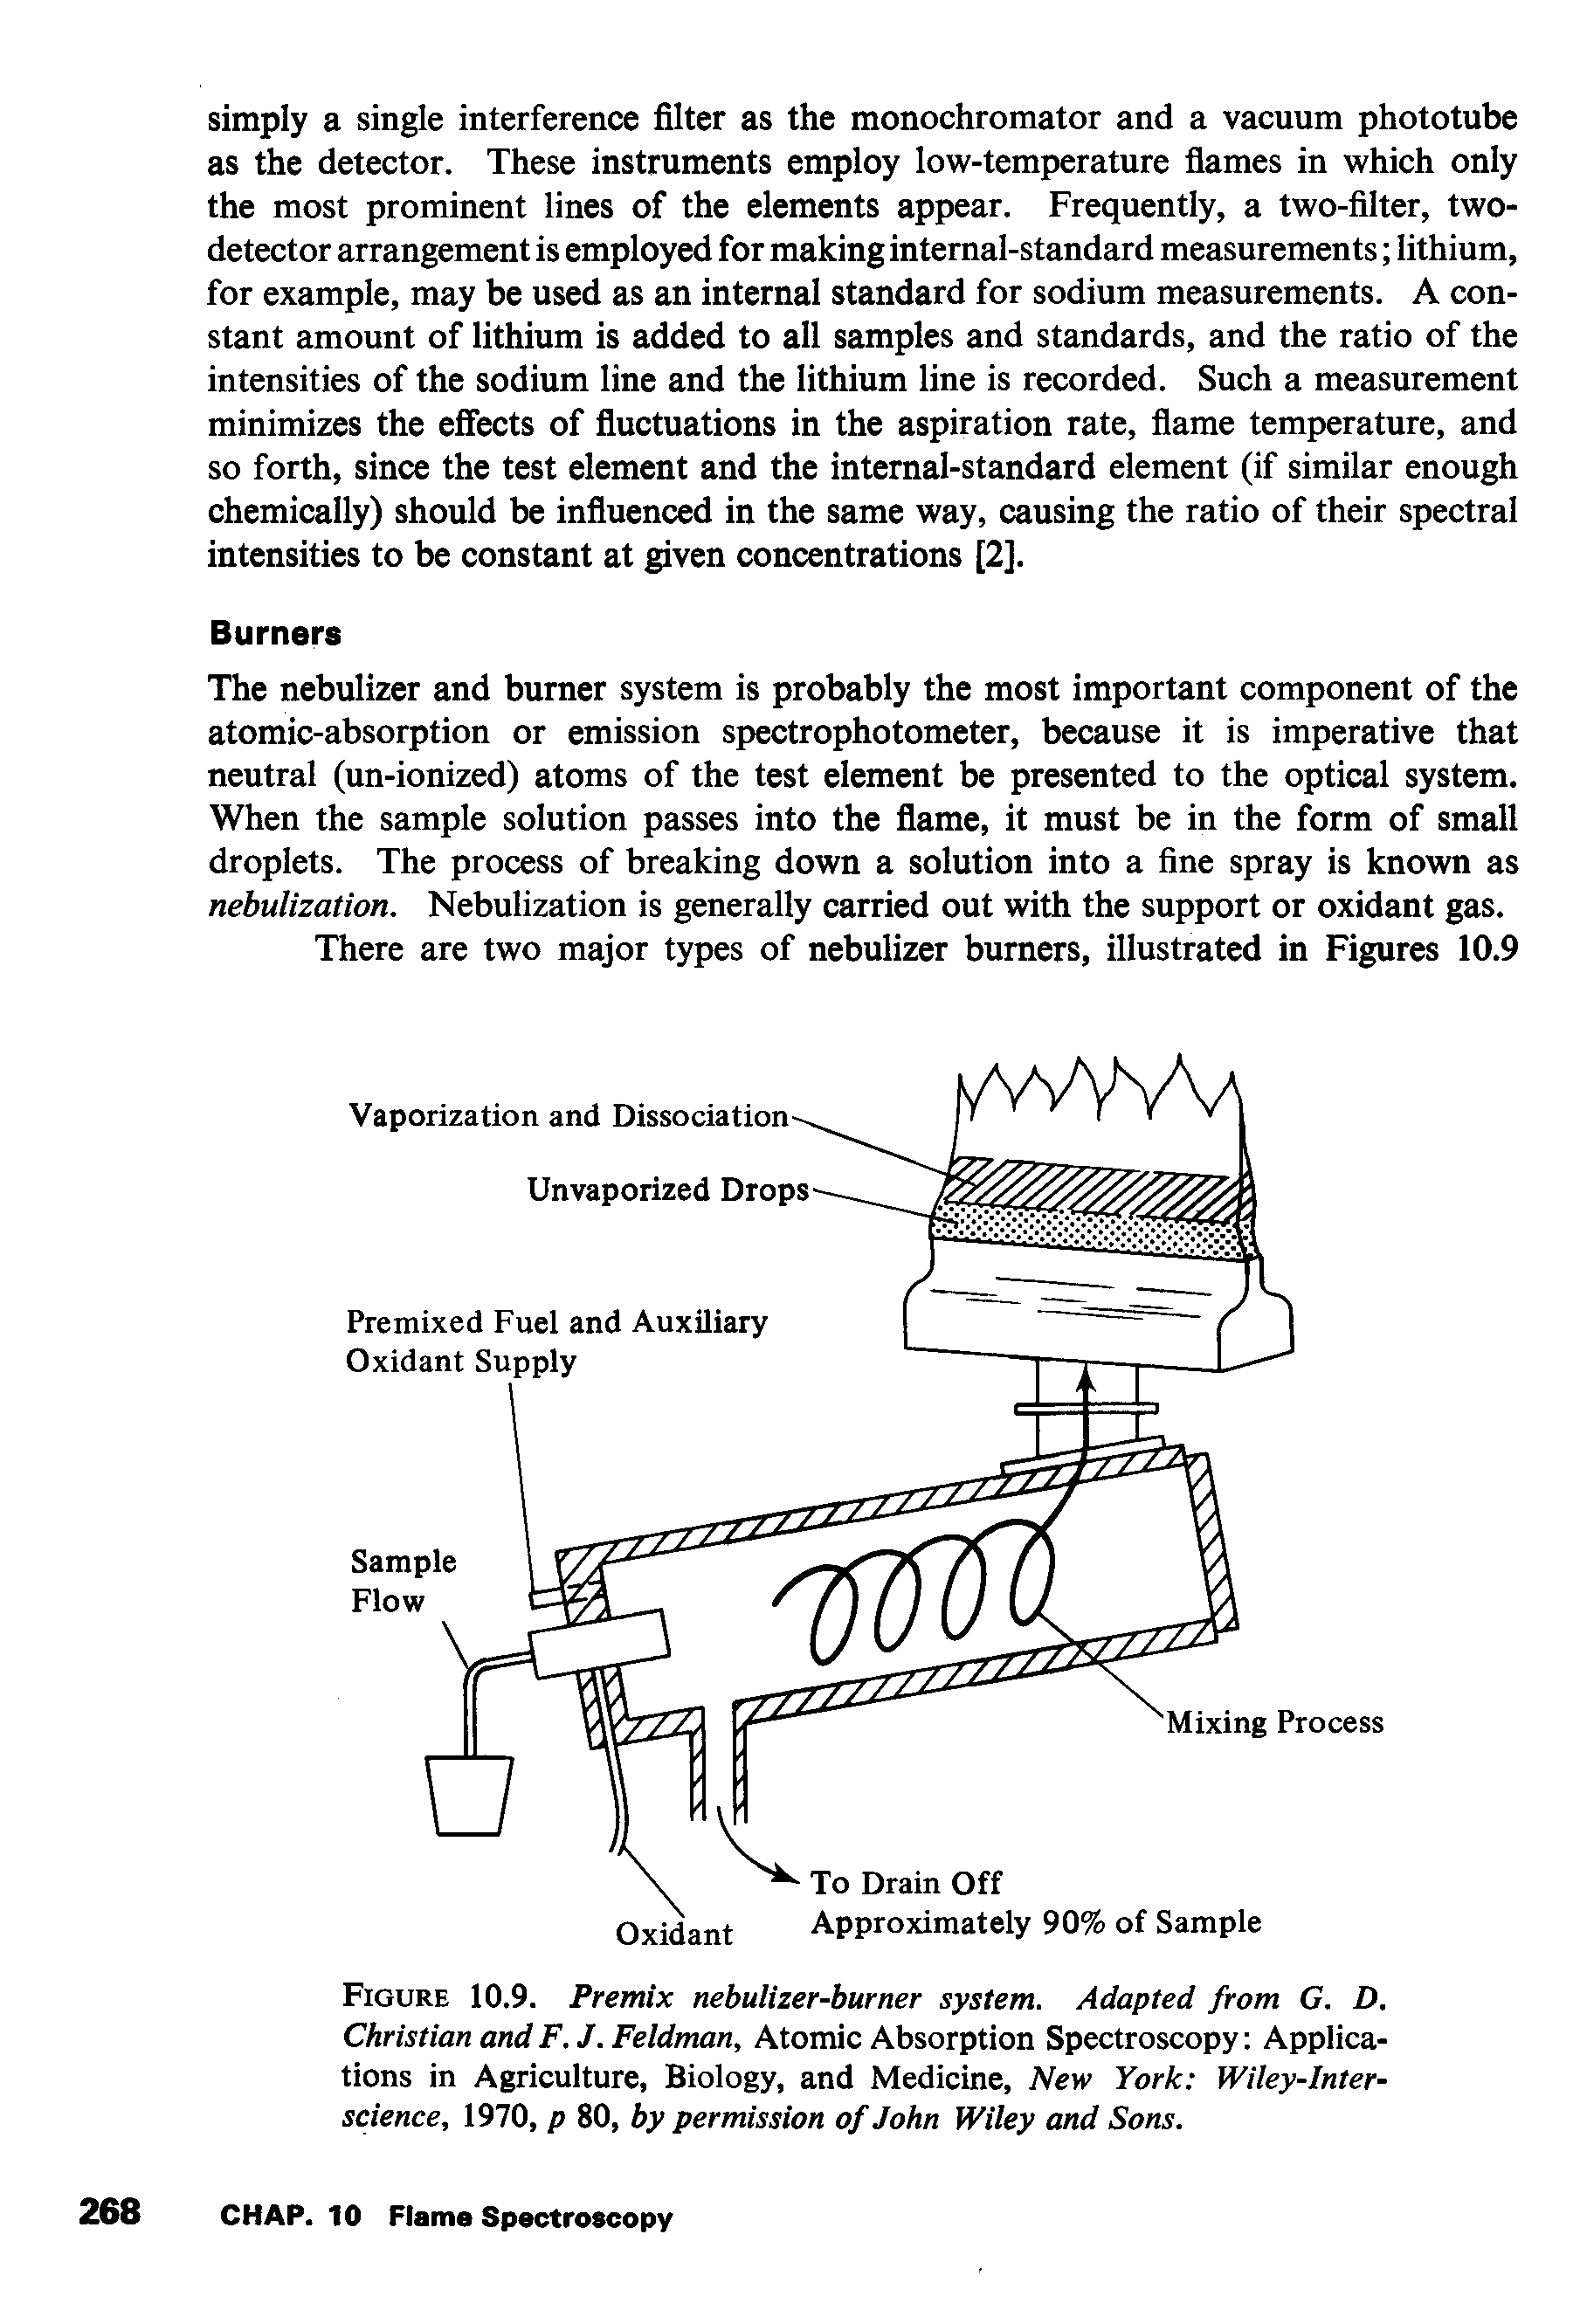 Figure 10.9. Premix nebulizer-burner system. Adapted from G. D. Christian andF. J. Feldman, Atomic Absorption Spectroscopy Applications in Agriculture, Biology, and Medicine, New York Wiley-Inter-science, 1970, p 80, by permission of John Wiley and Sons.